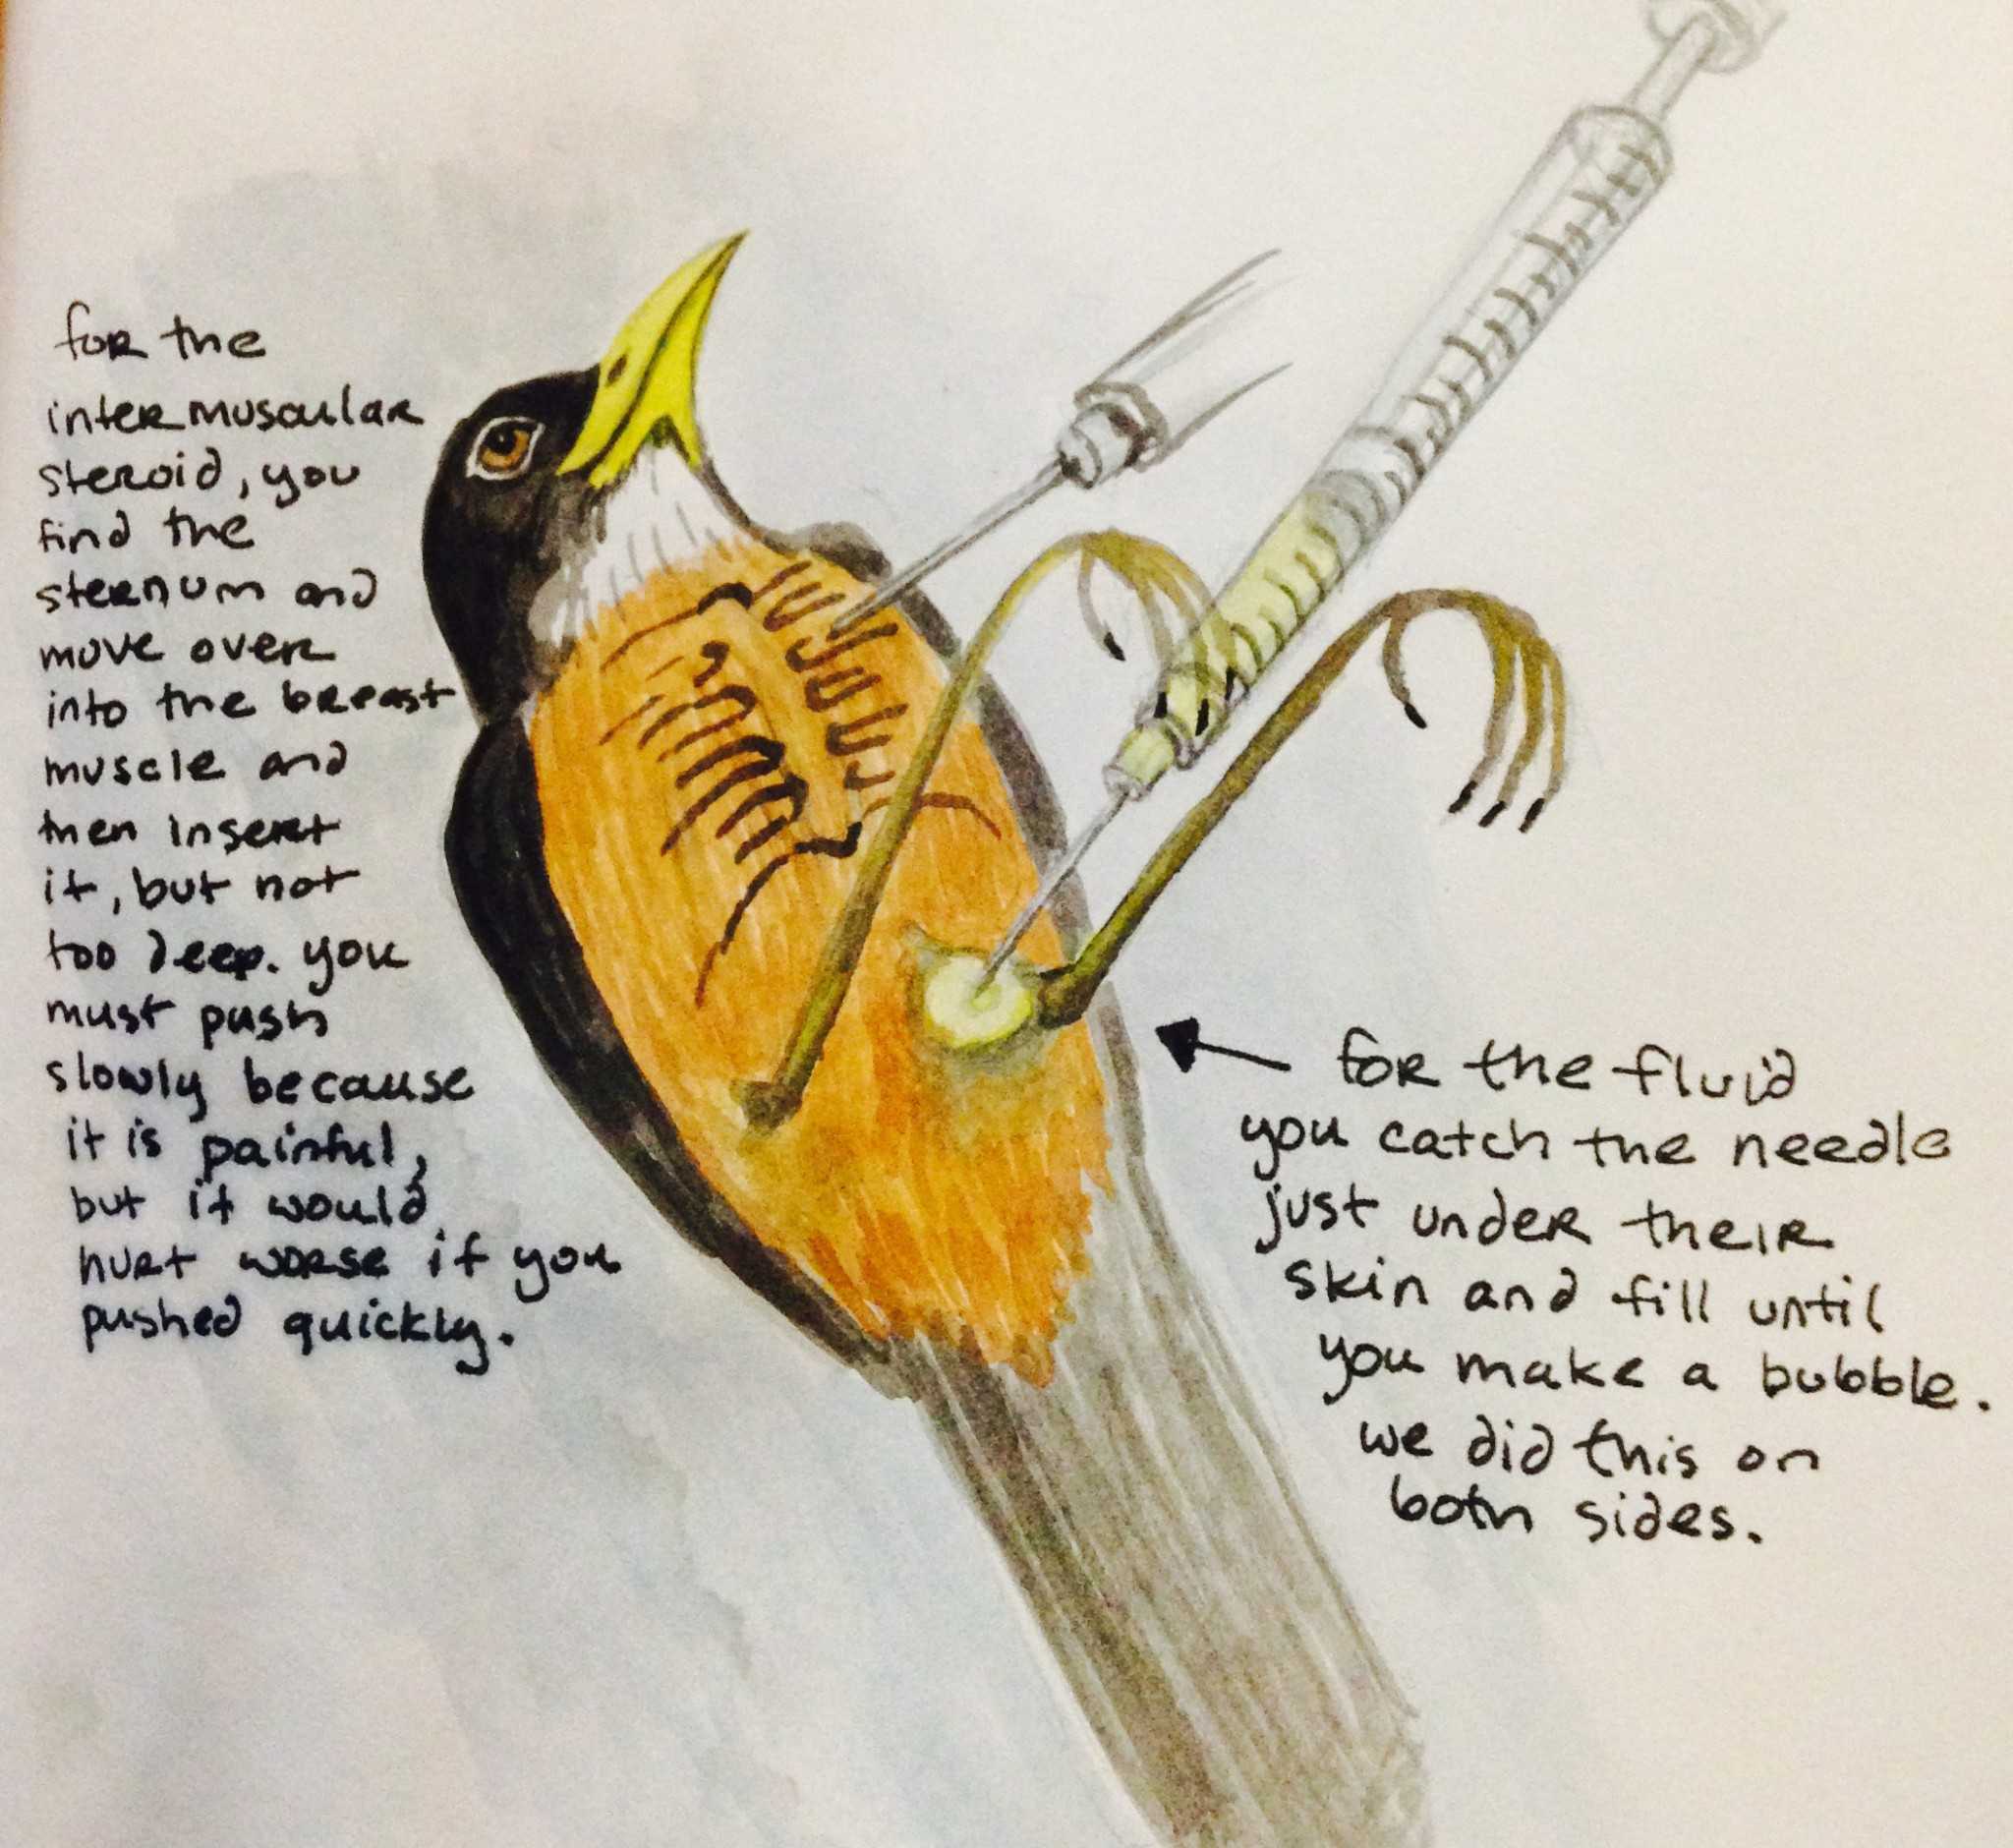 Watercolor sketch of how to do IM andsubcutaneous injections in an American Robin by Victoria Dixie Crowe. (2002)